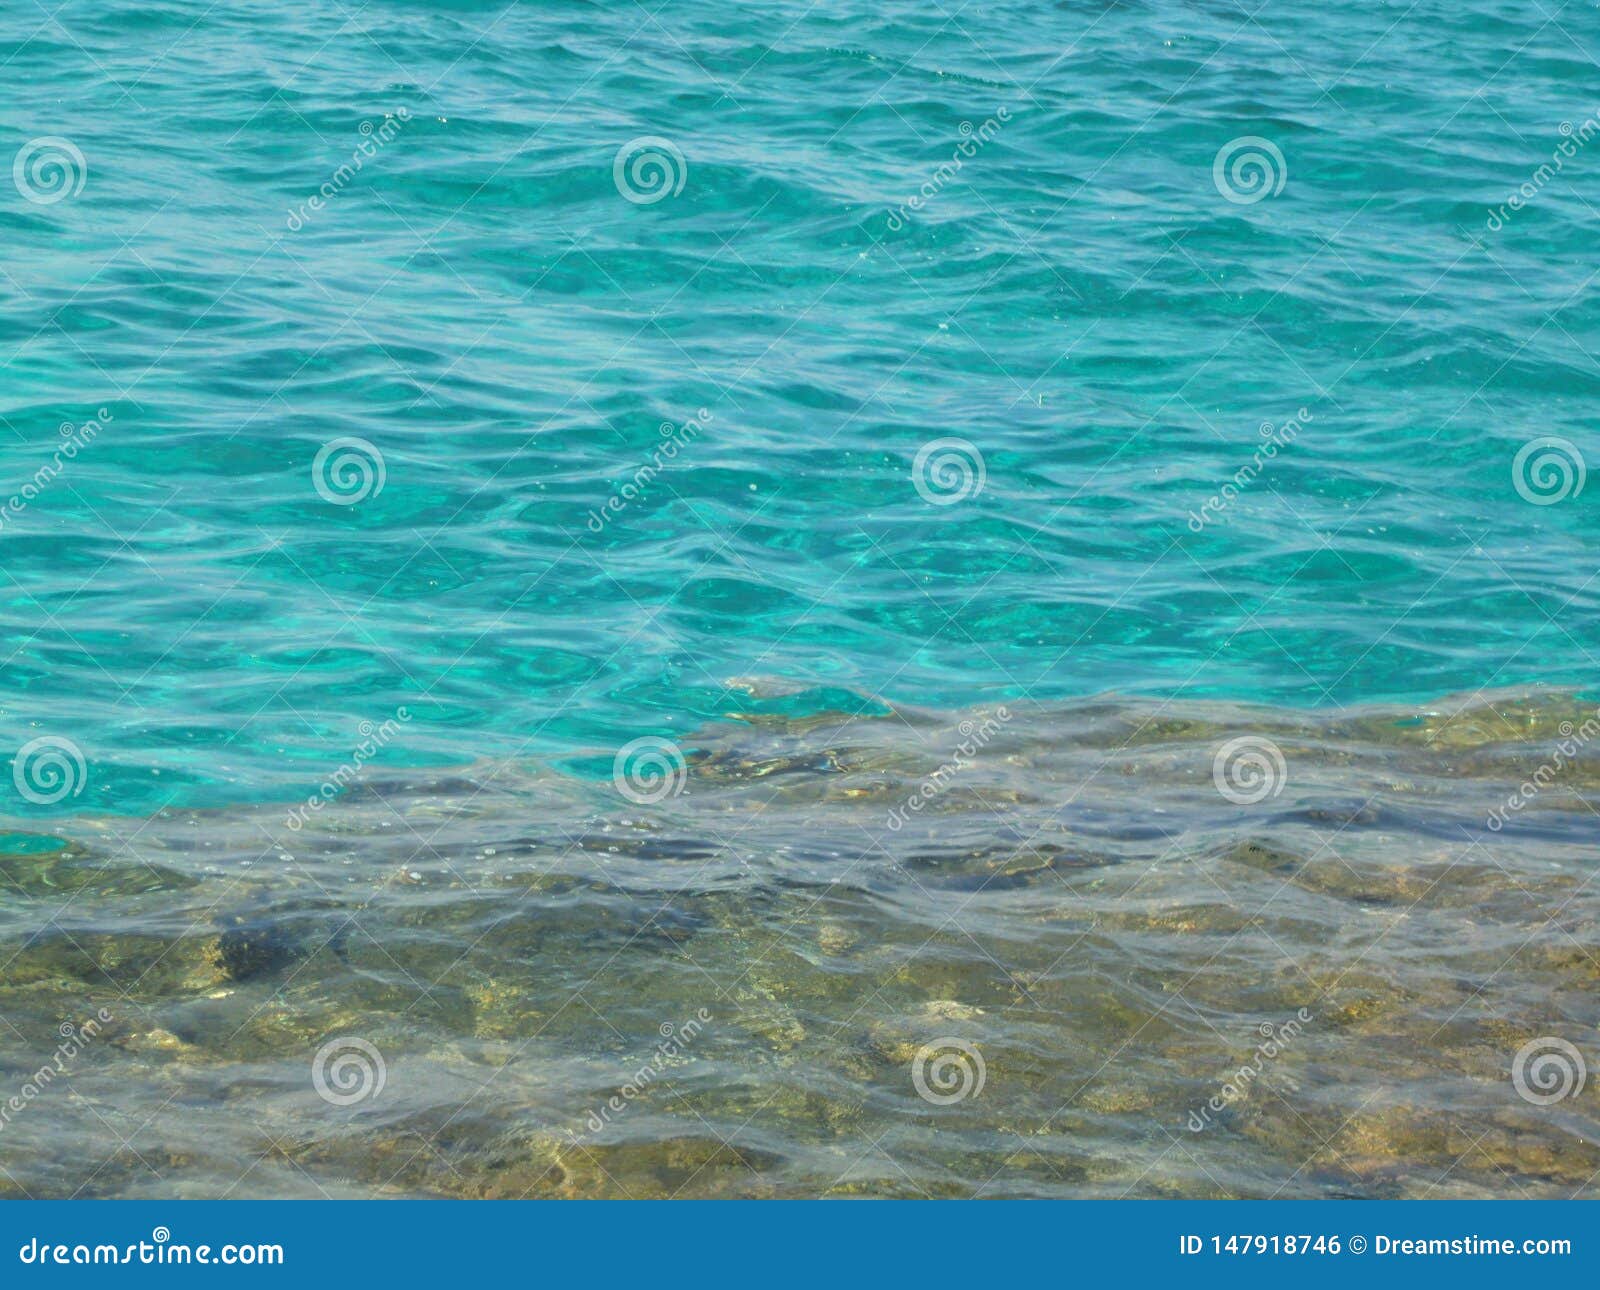 crystal clear turquoise water on rocky bottom